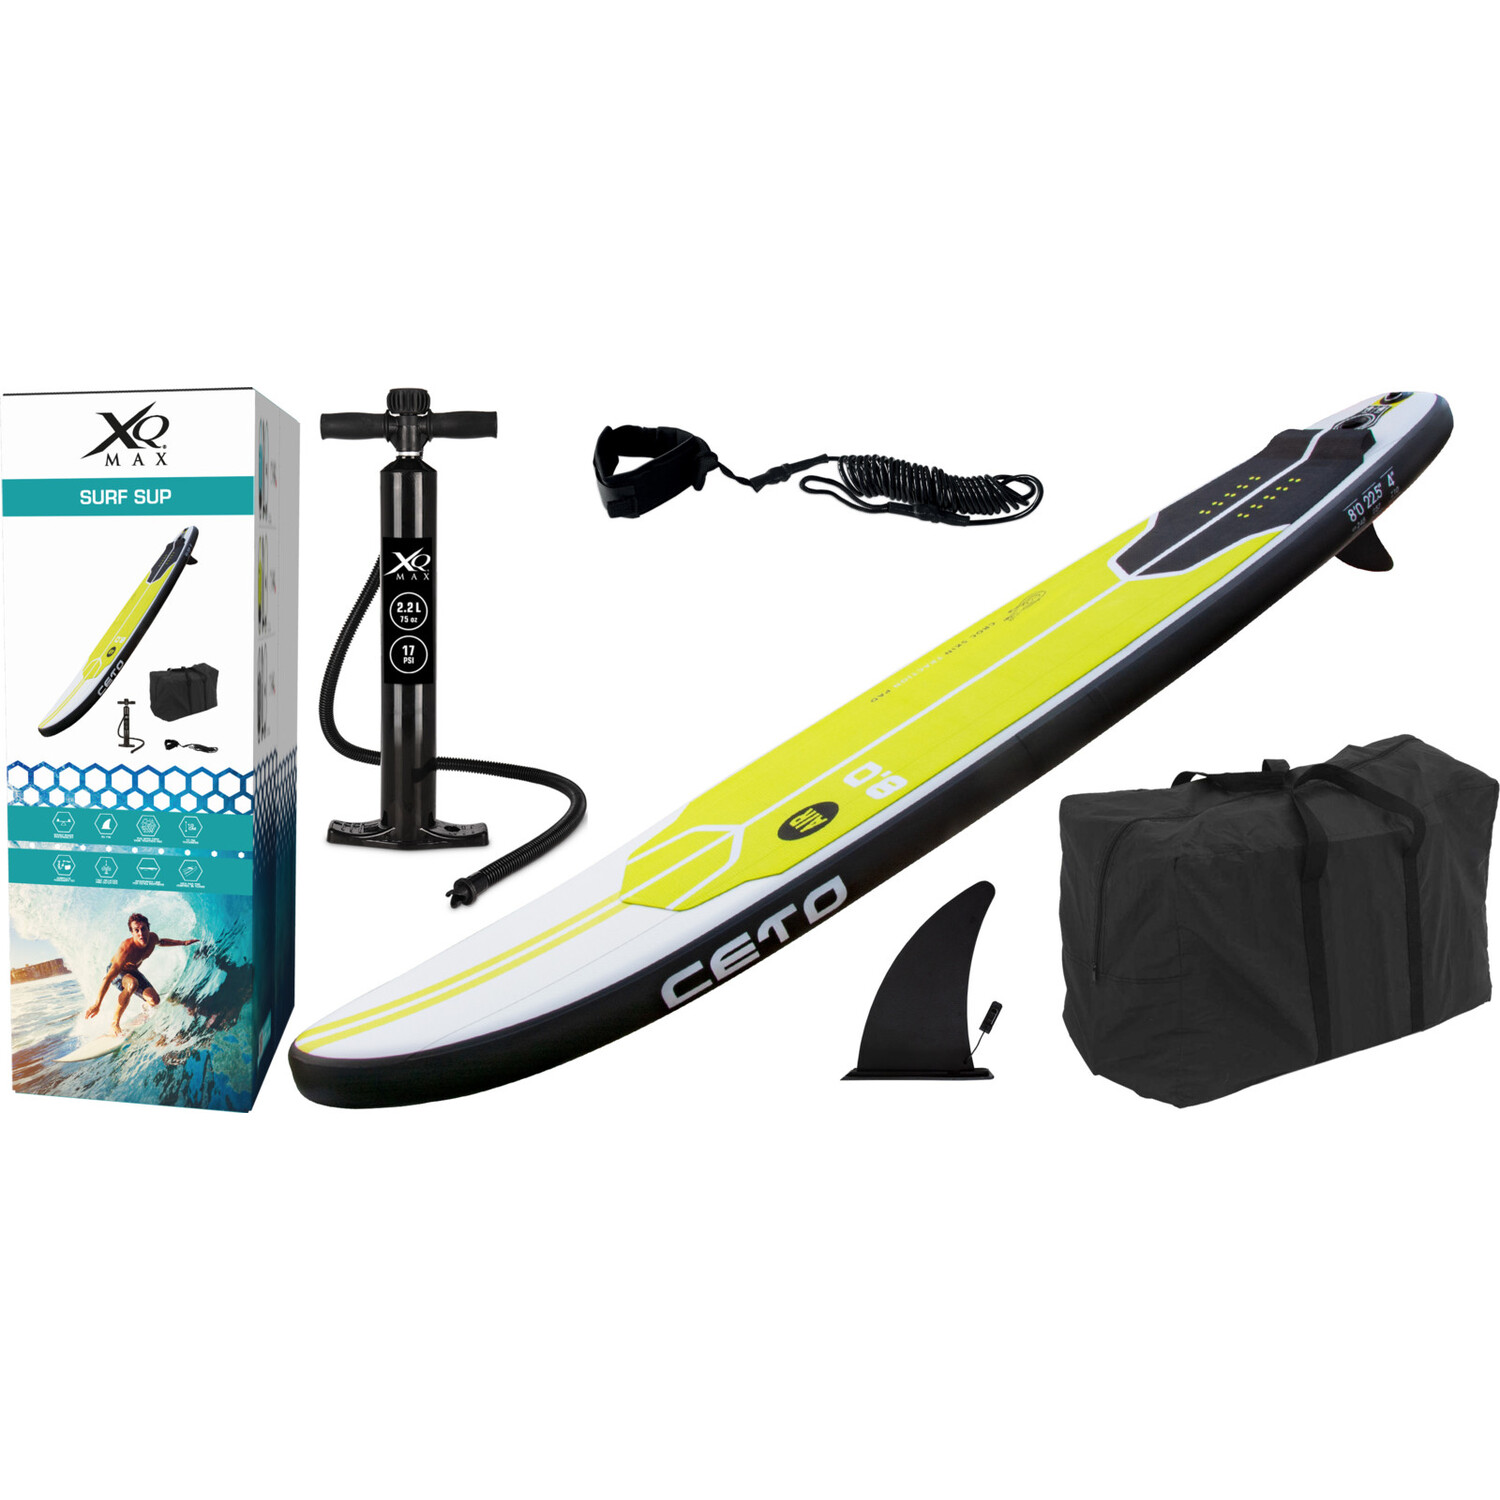 XQMAX 245 Surf Paddle Board - Lime Image 1